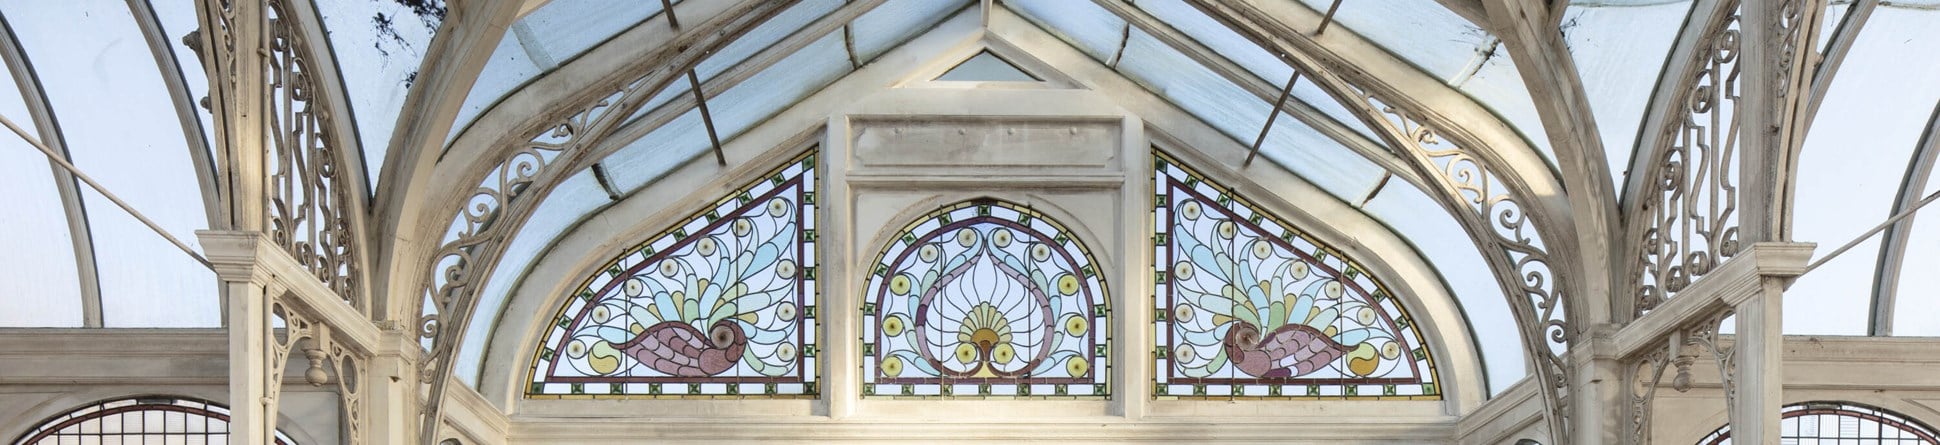 A white framed conservatory with decorative scrolled ironwork and, above plain glass windows, three beautifully decorated panels showing birds and a central peacock feather design.